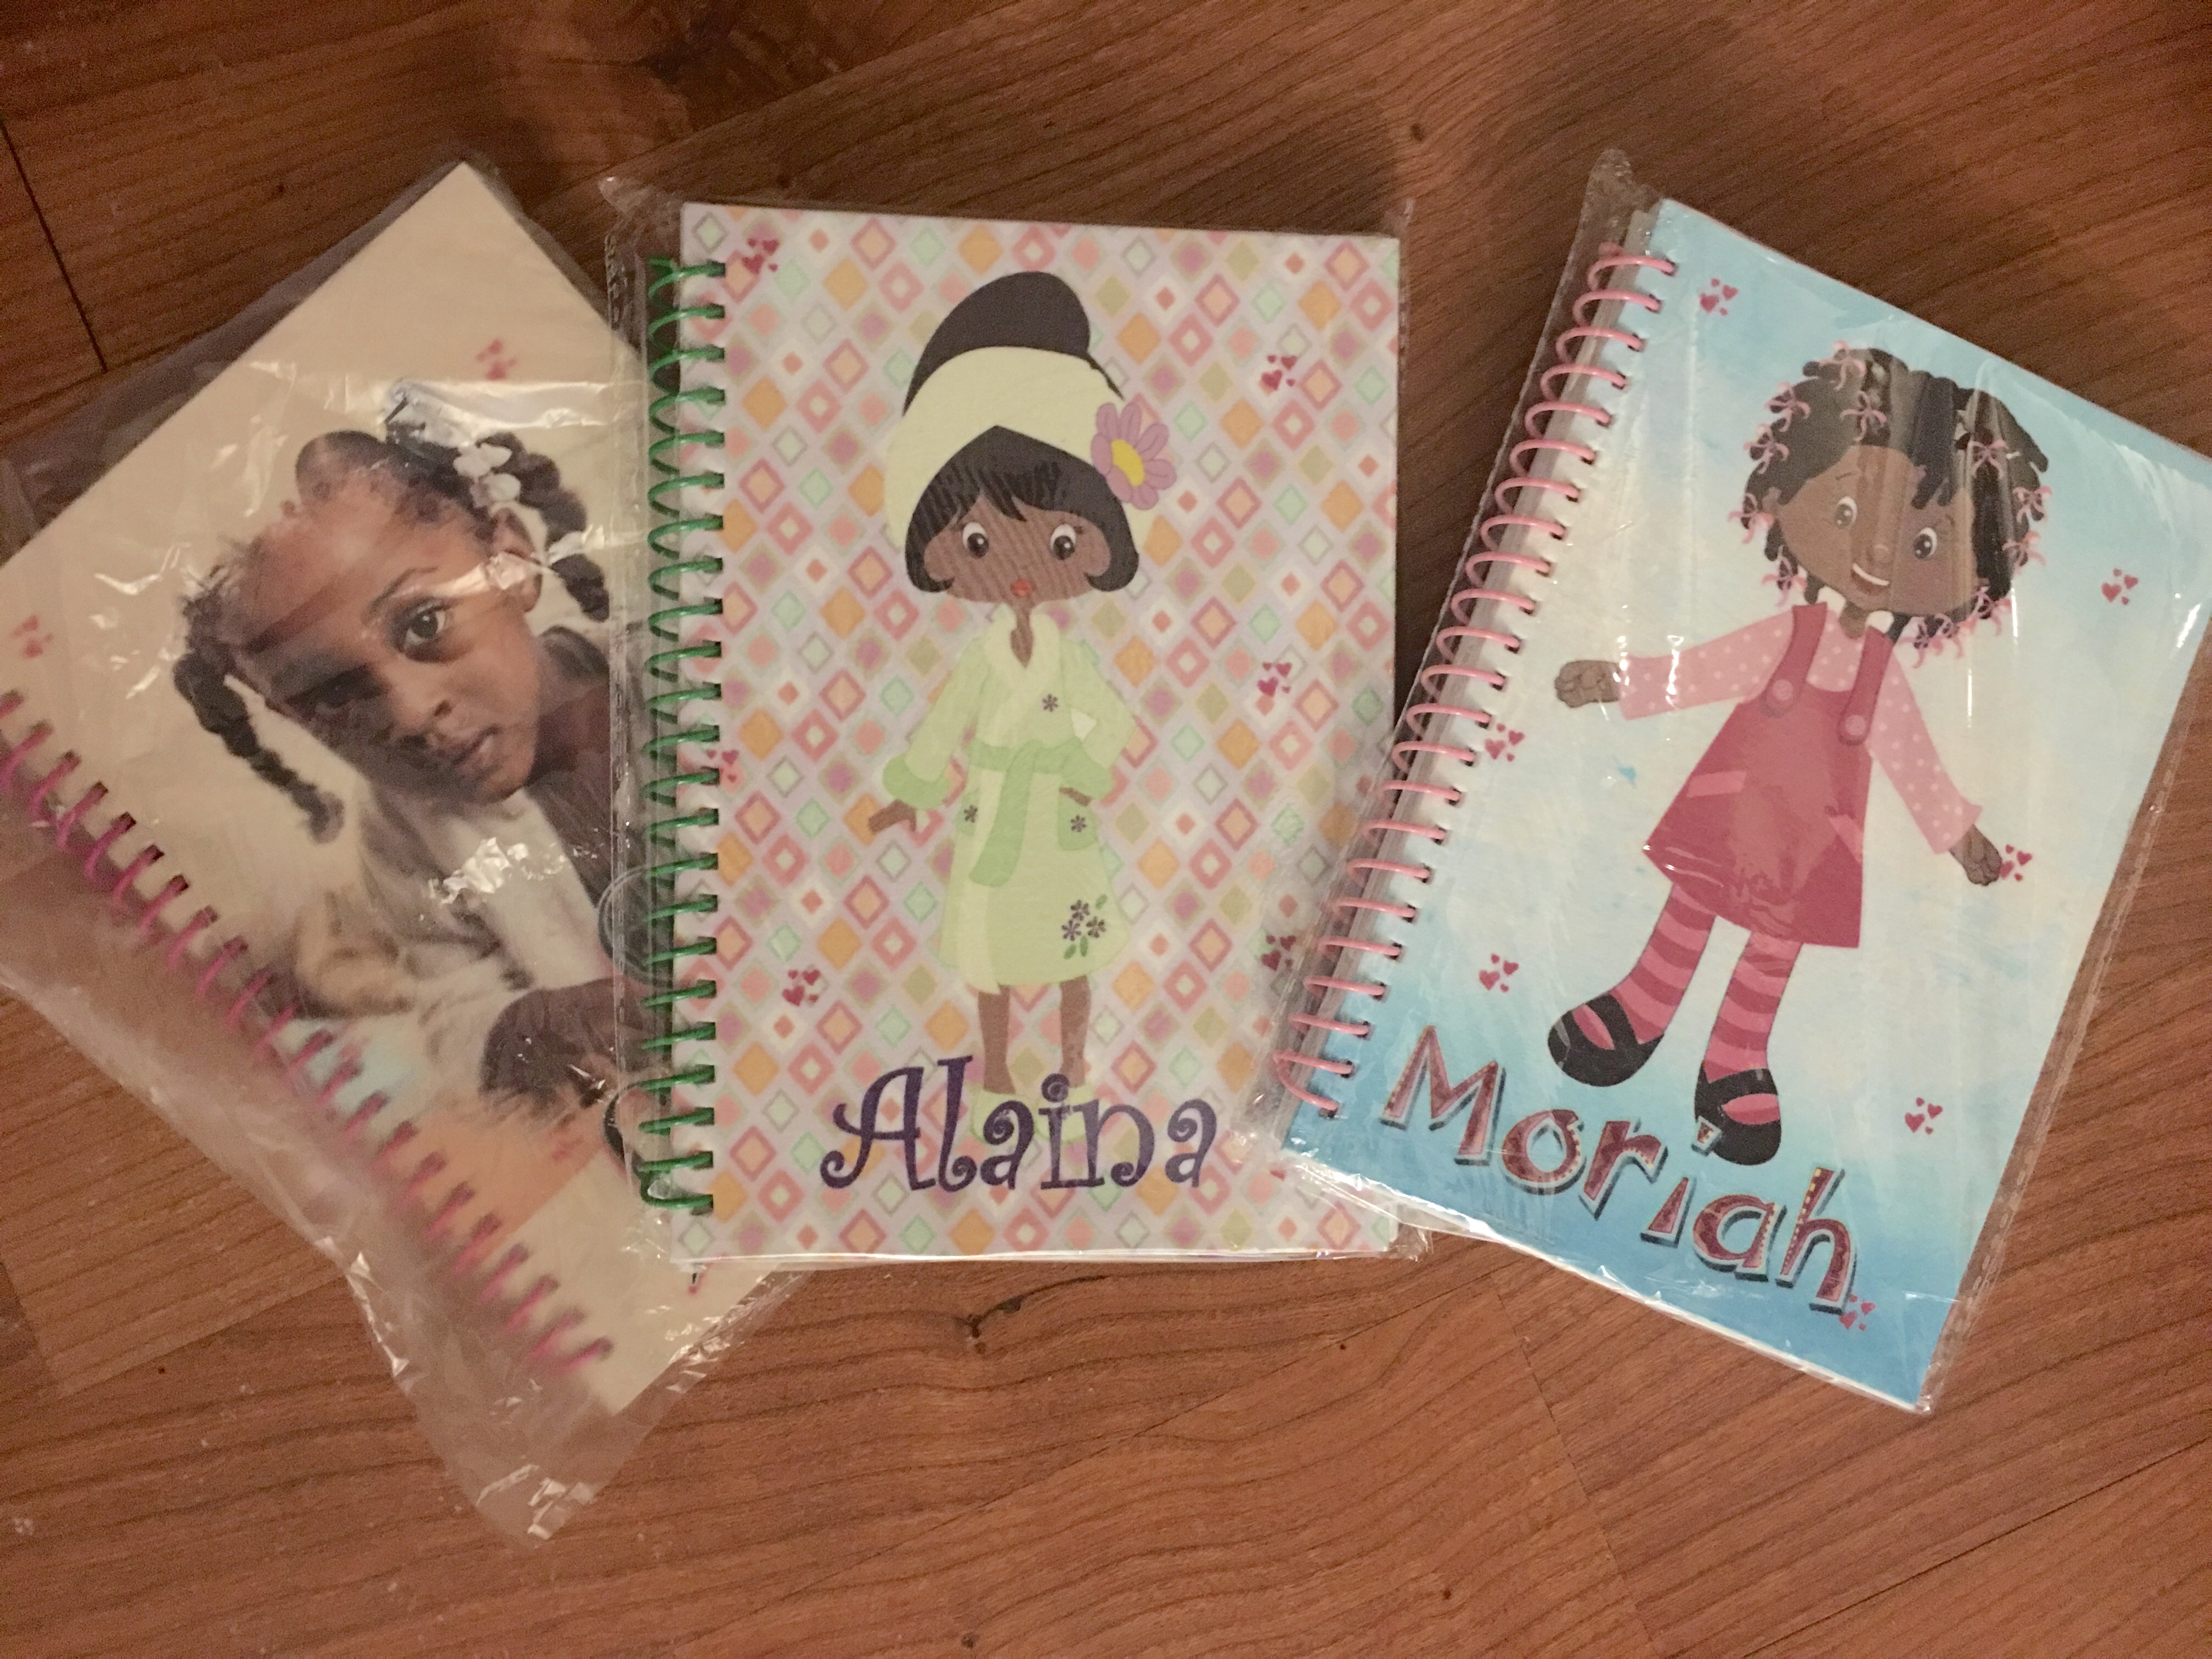 Felt Notebook made with sublimation printing